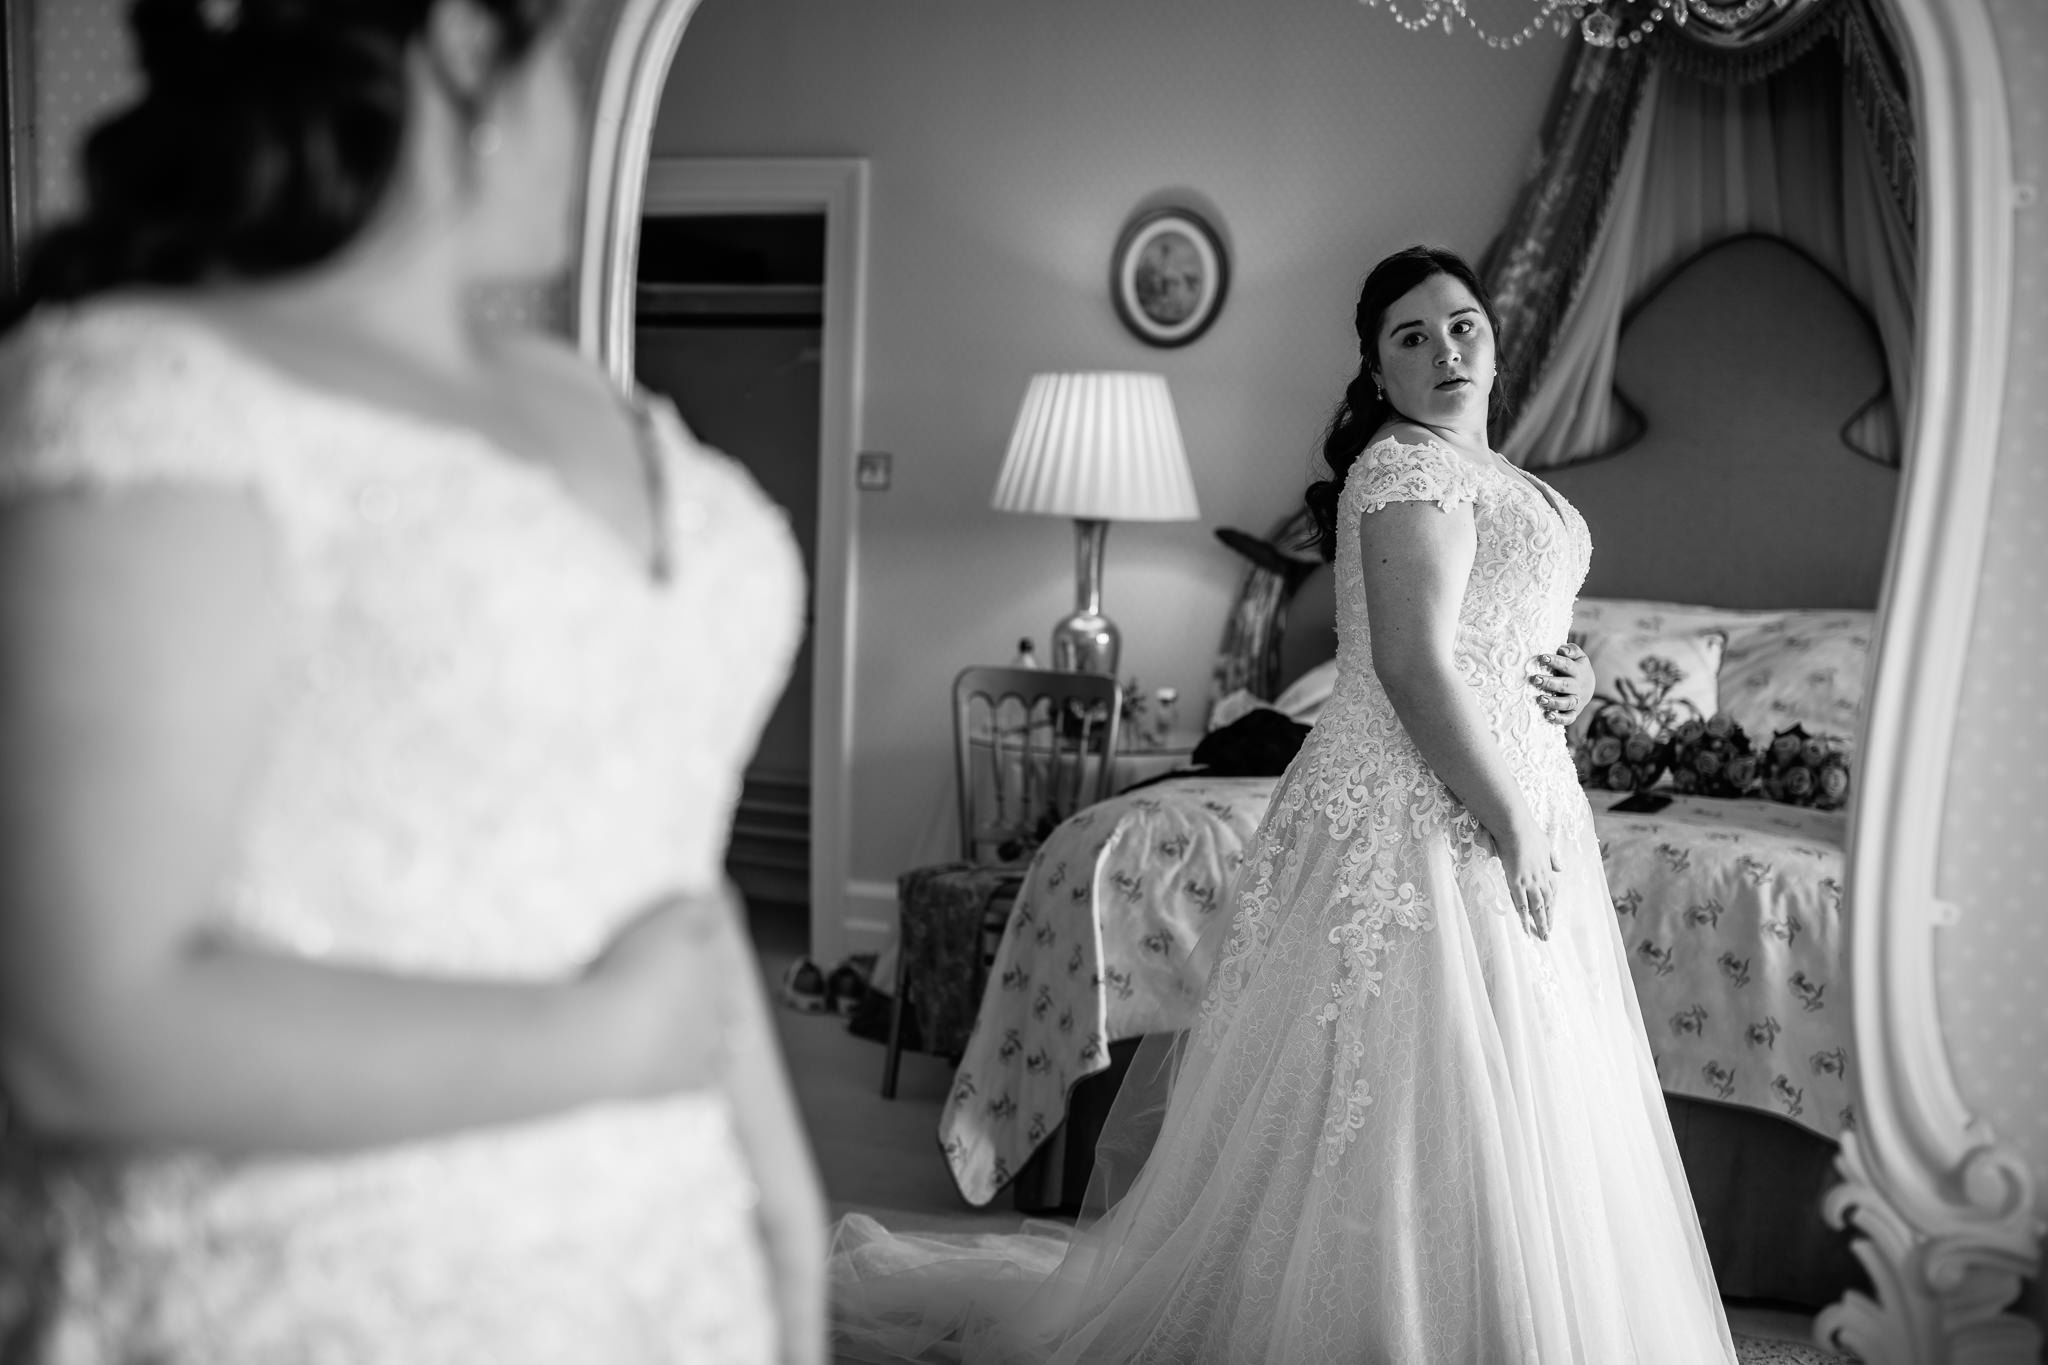  Bride looking at her reflection before the wedding ceremony at Wadhurst Castle 